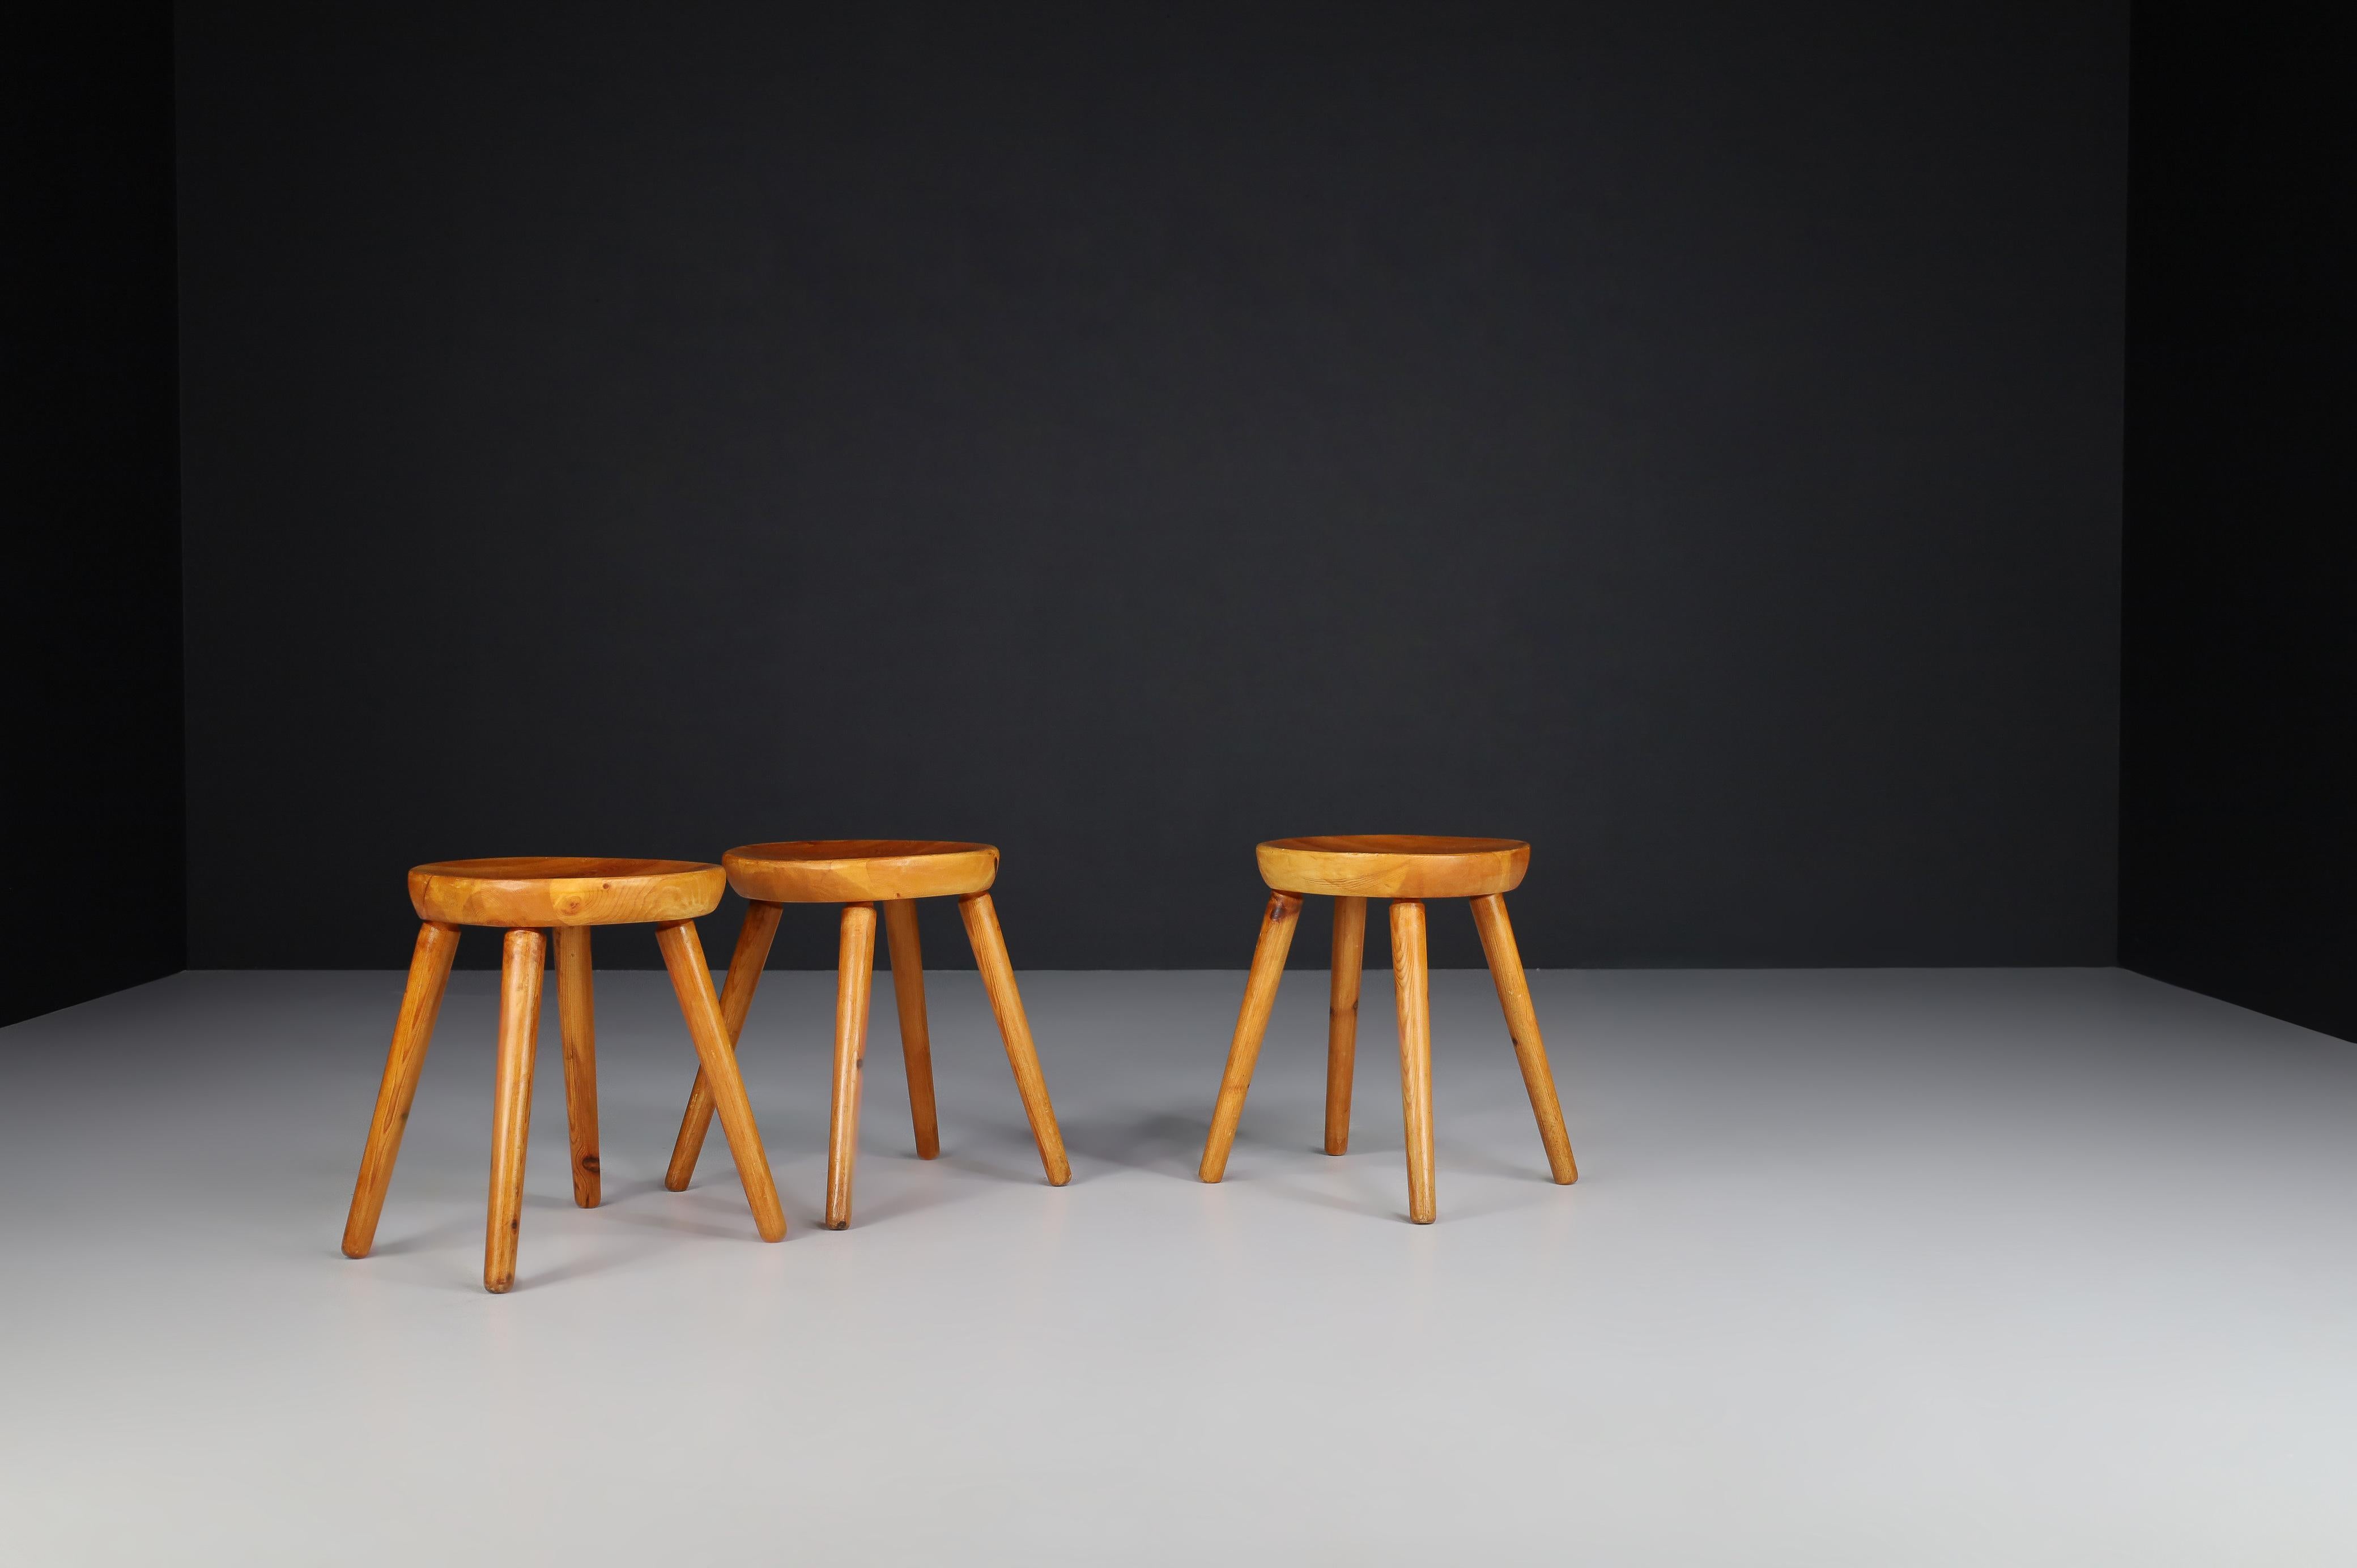 Pinewood French Stools in the Style of Charlotte Perriand, France, 1950s For Sale 3